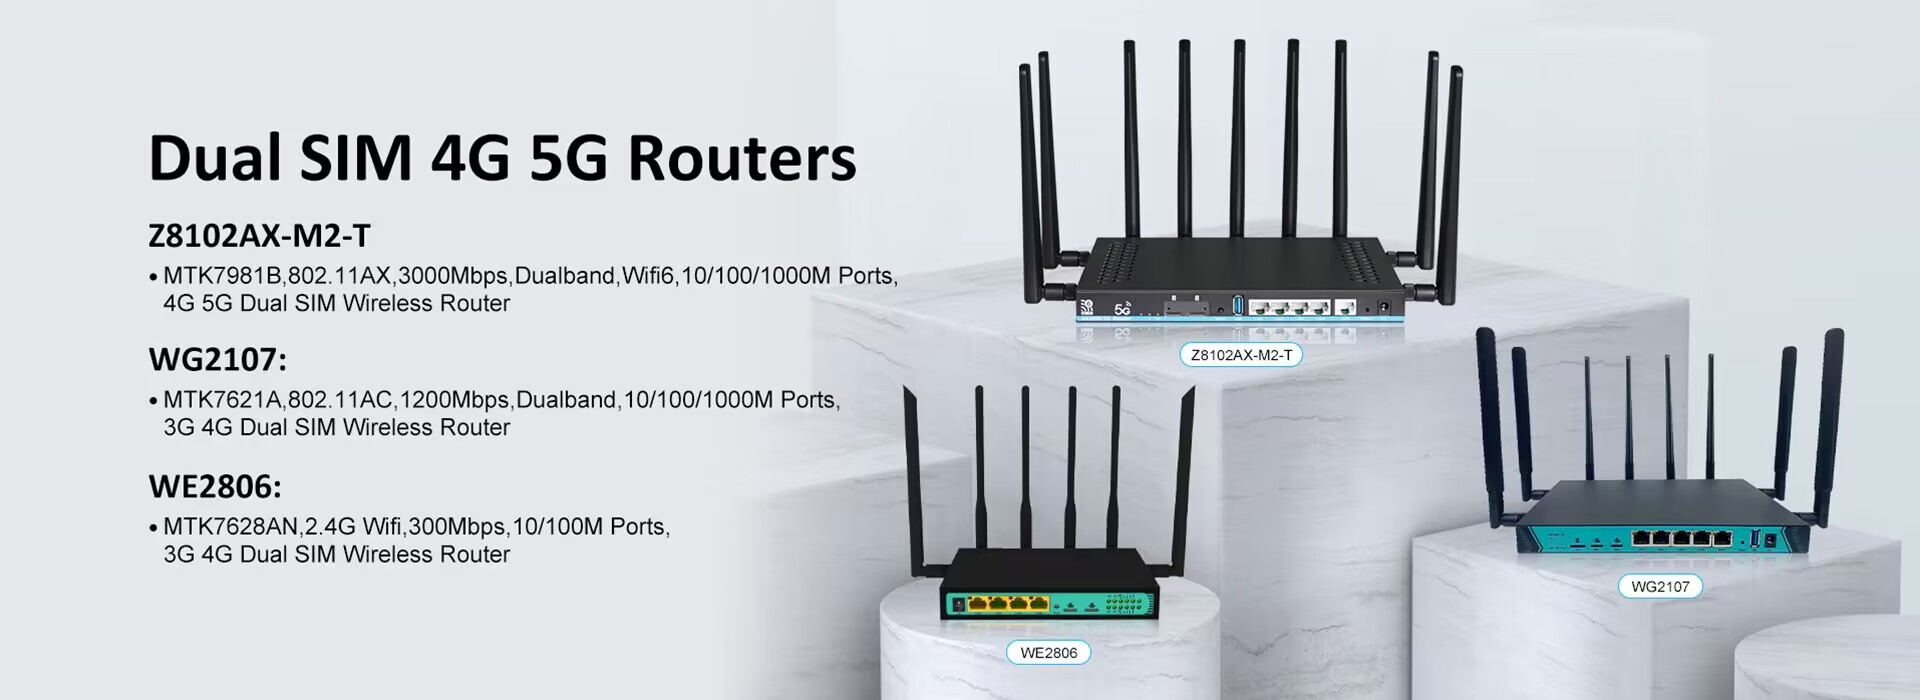 Dual SIM 4G 5G Routers